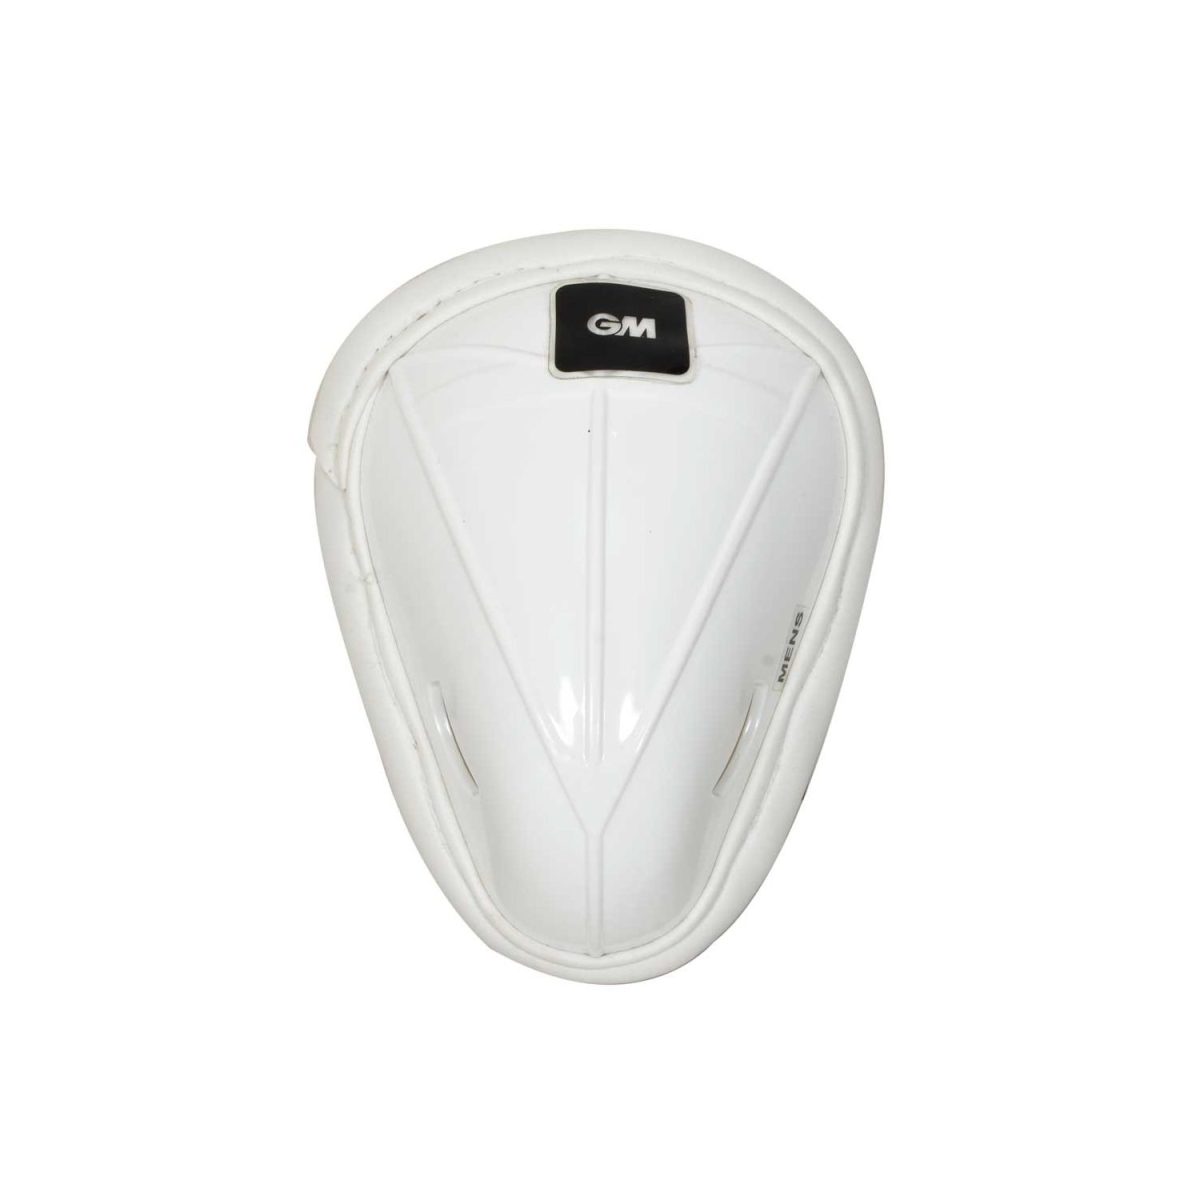 GM 5620 Traditionally Shaped Abdominal Guard - Slip in Padded